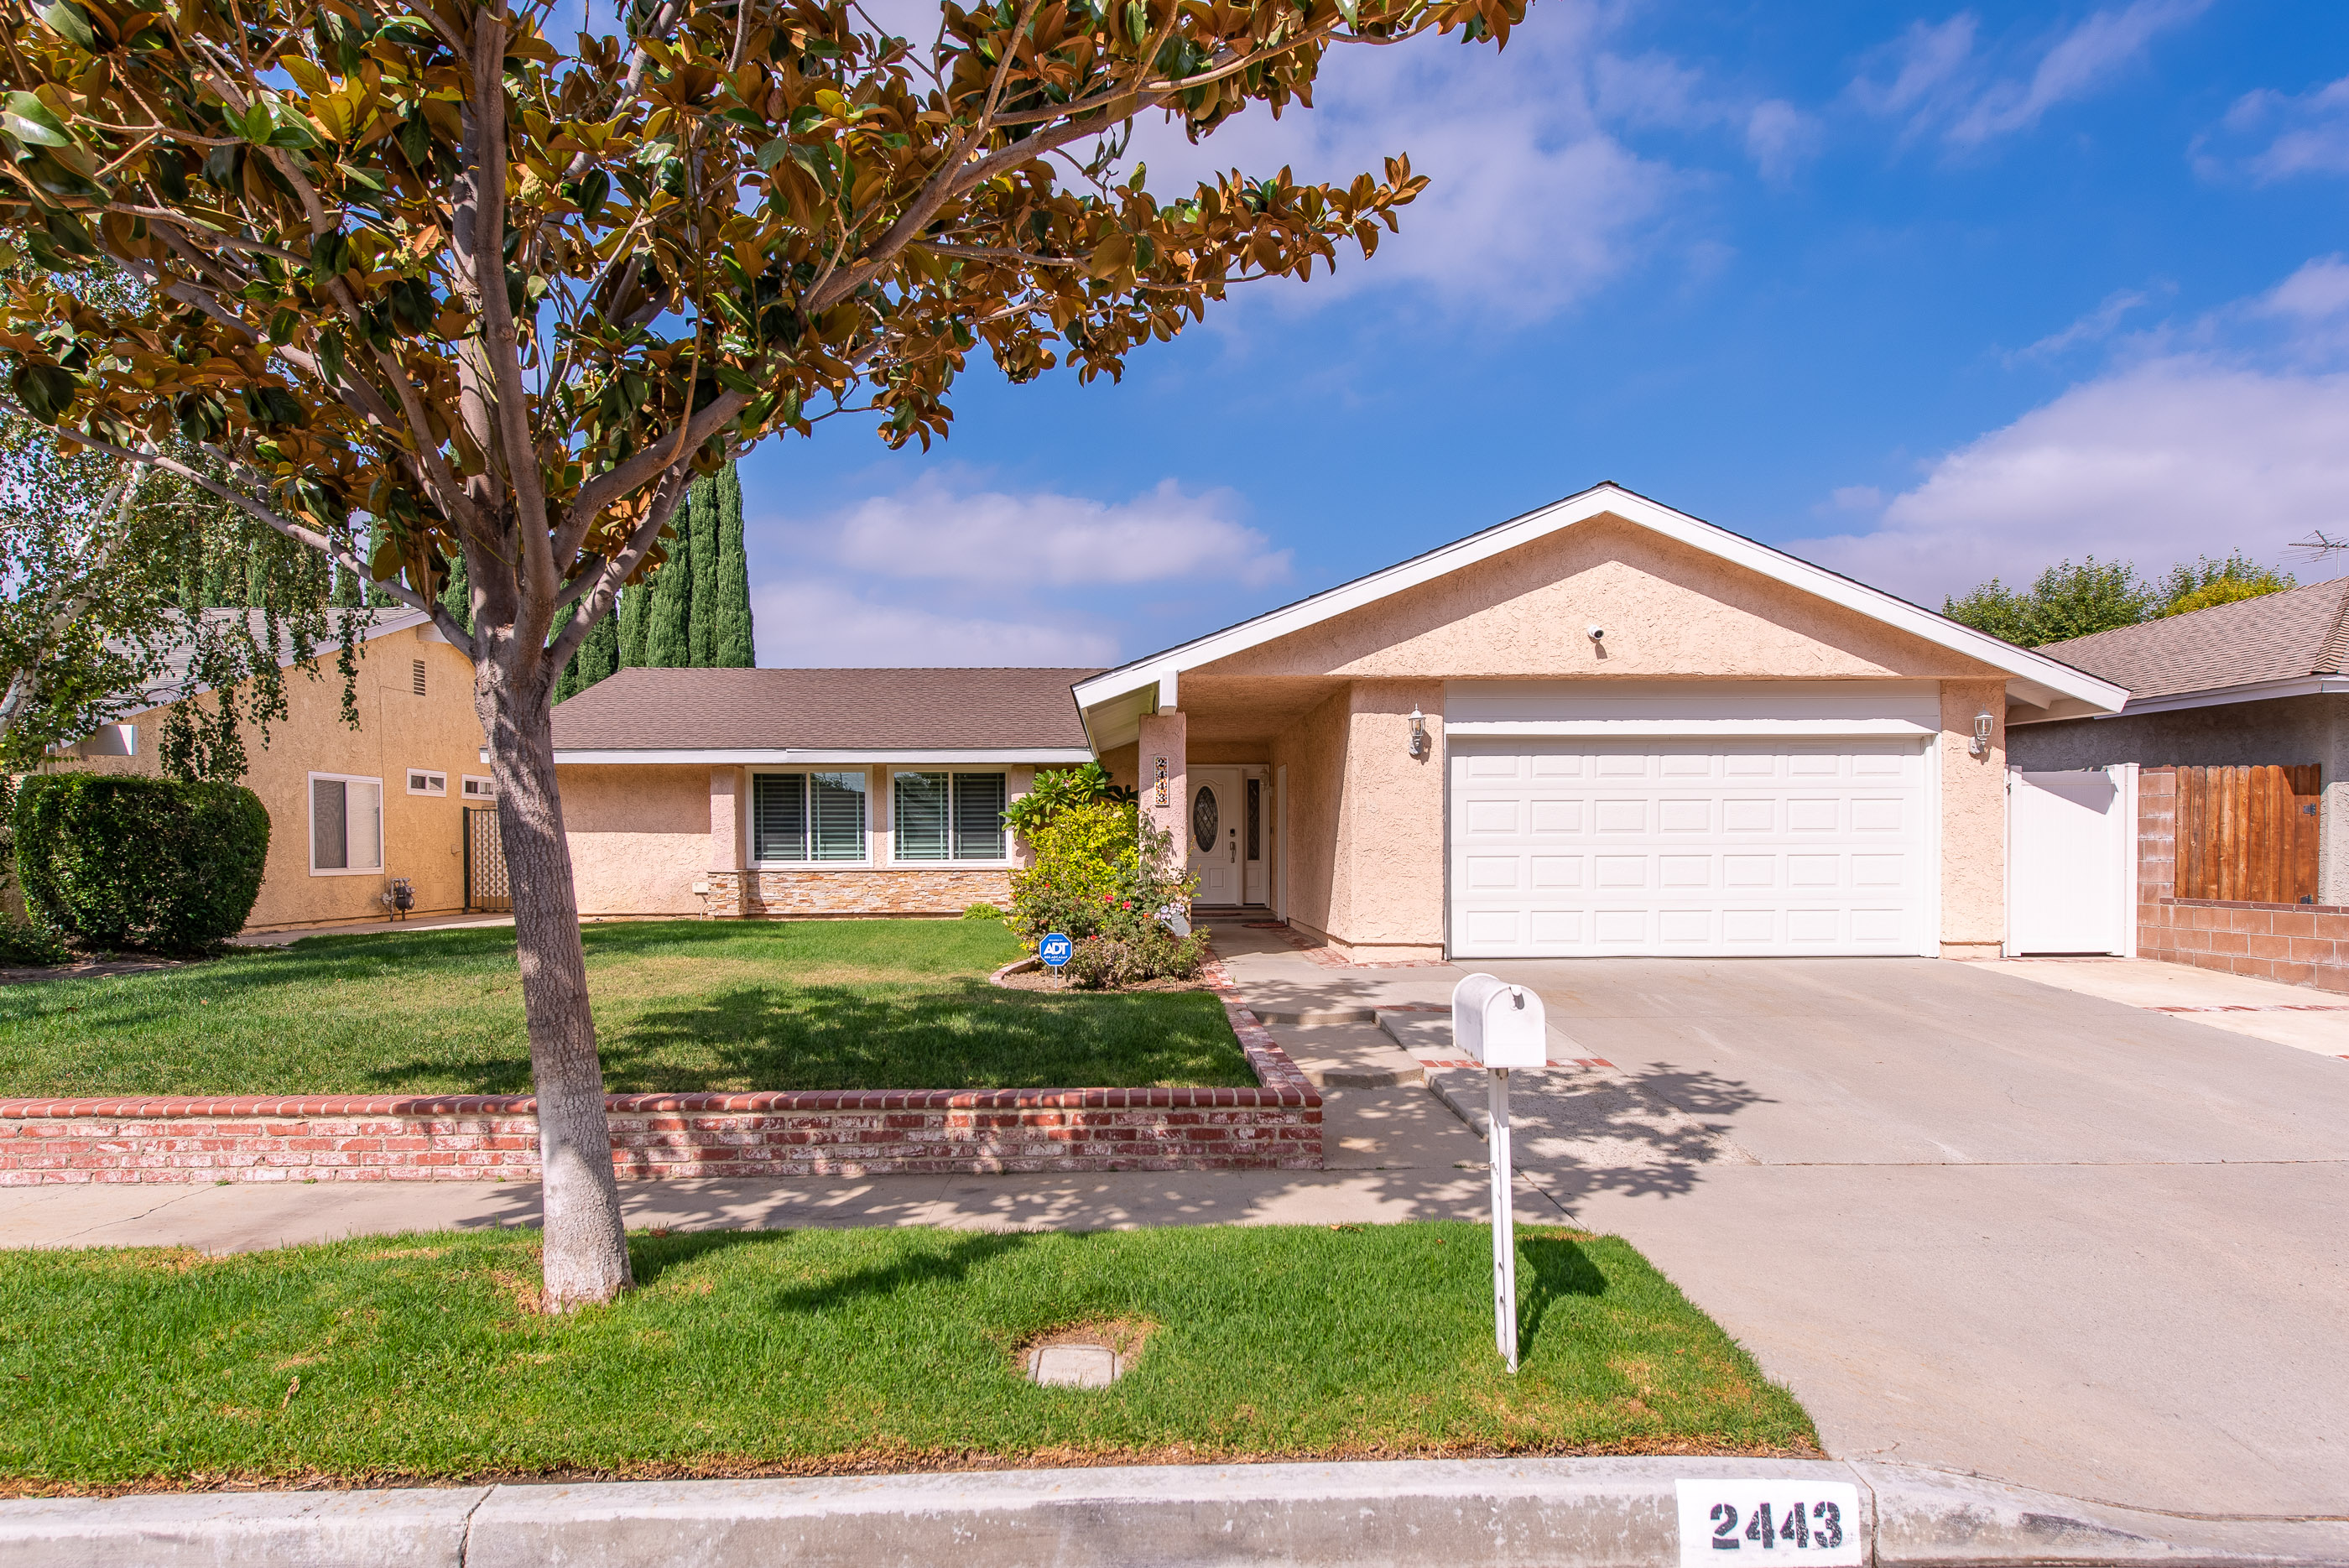 2443 Sweetwood St Simi Valley Ca 93063